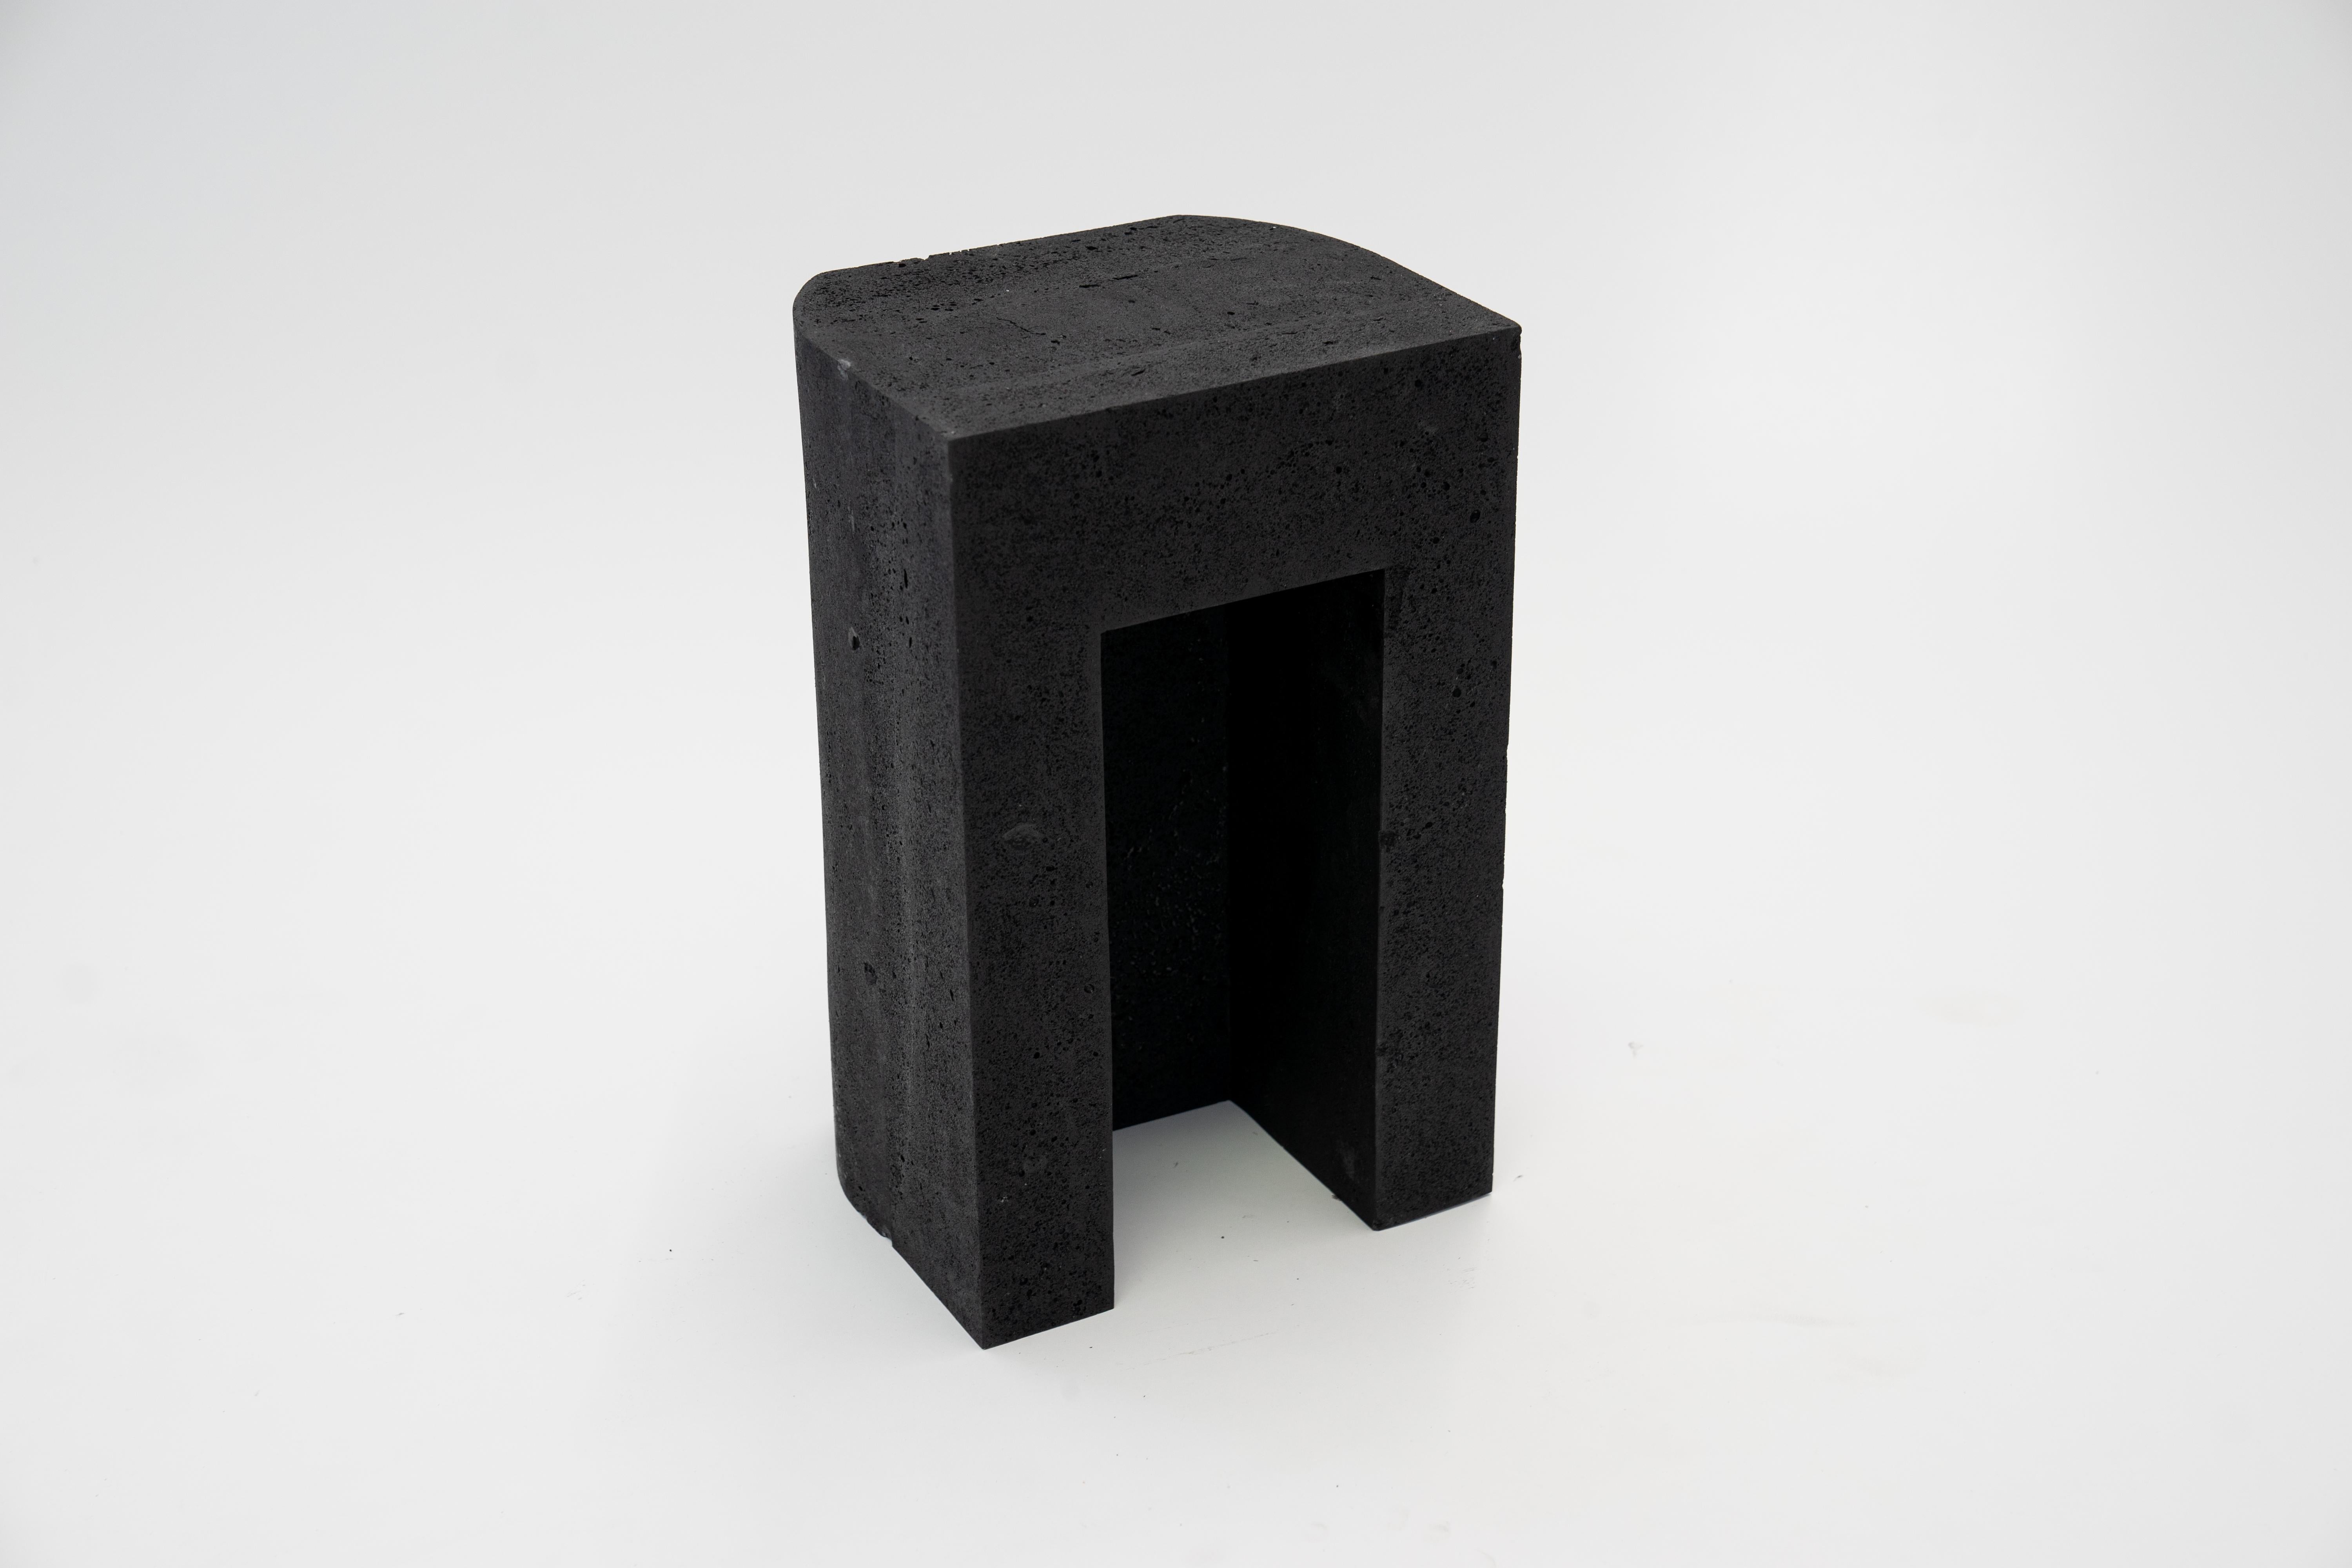 U-Block signed by Cal Summers
Materials: Wood fibre, Resin. Graphite
Steel insert with bronze finish
Size: 10” D x 14” W 19” H

Cal Summers is a British designer who makes bespoke handmade furniture and contemporary artefacts in which he